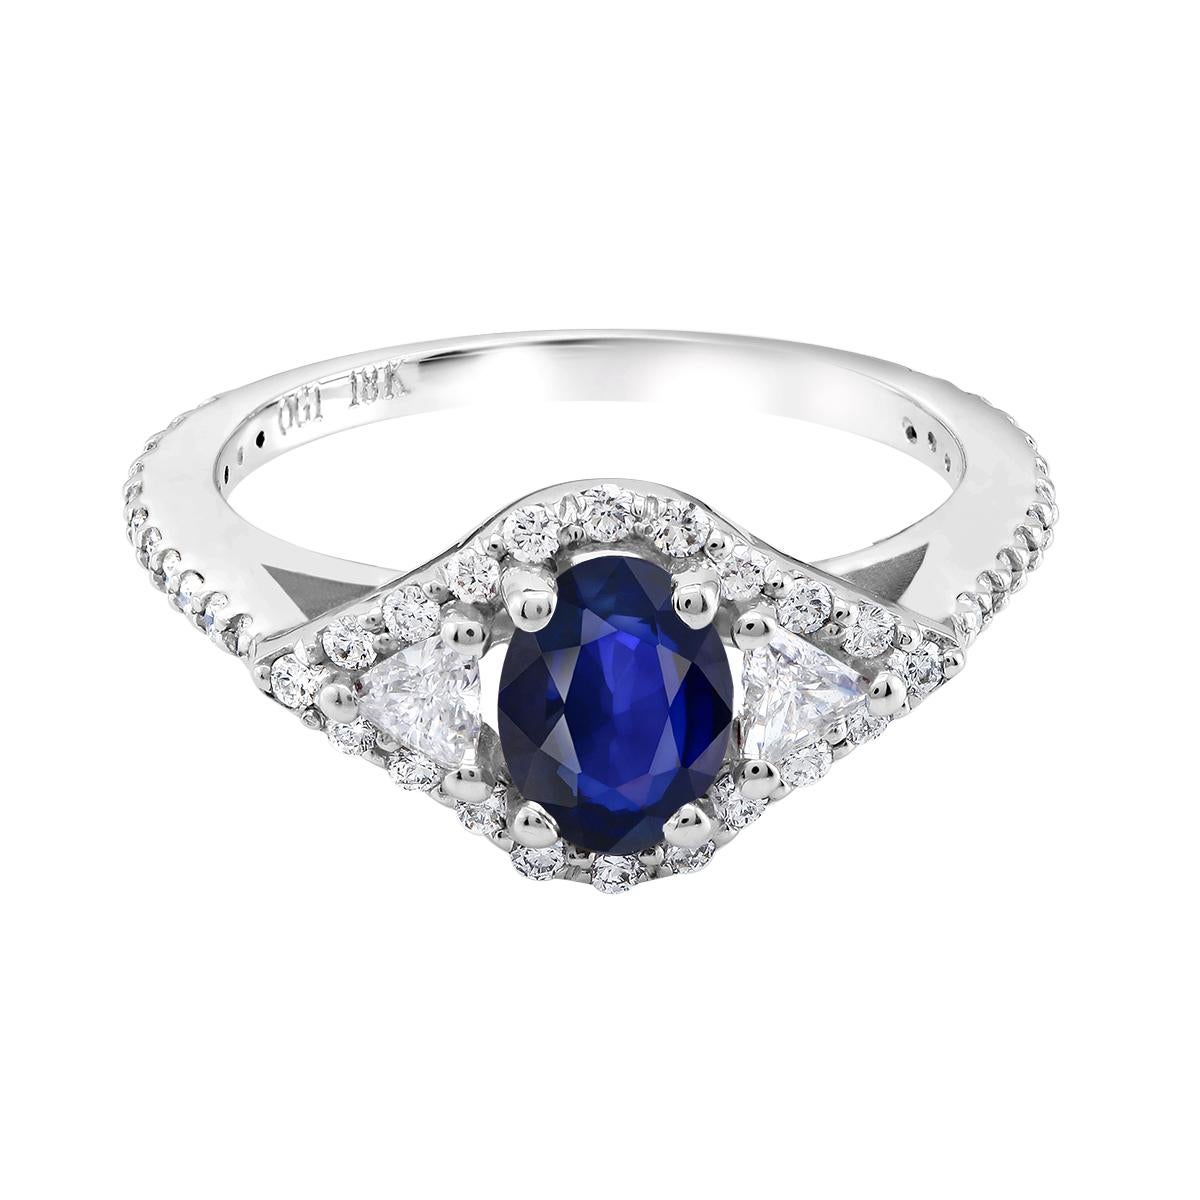 Sapphire and Diamond Cocktail White Gold Ring Weighing 1.95 Carat